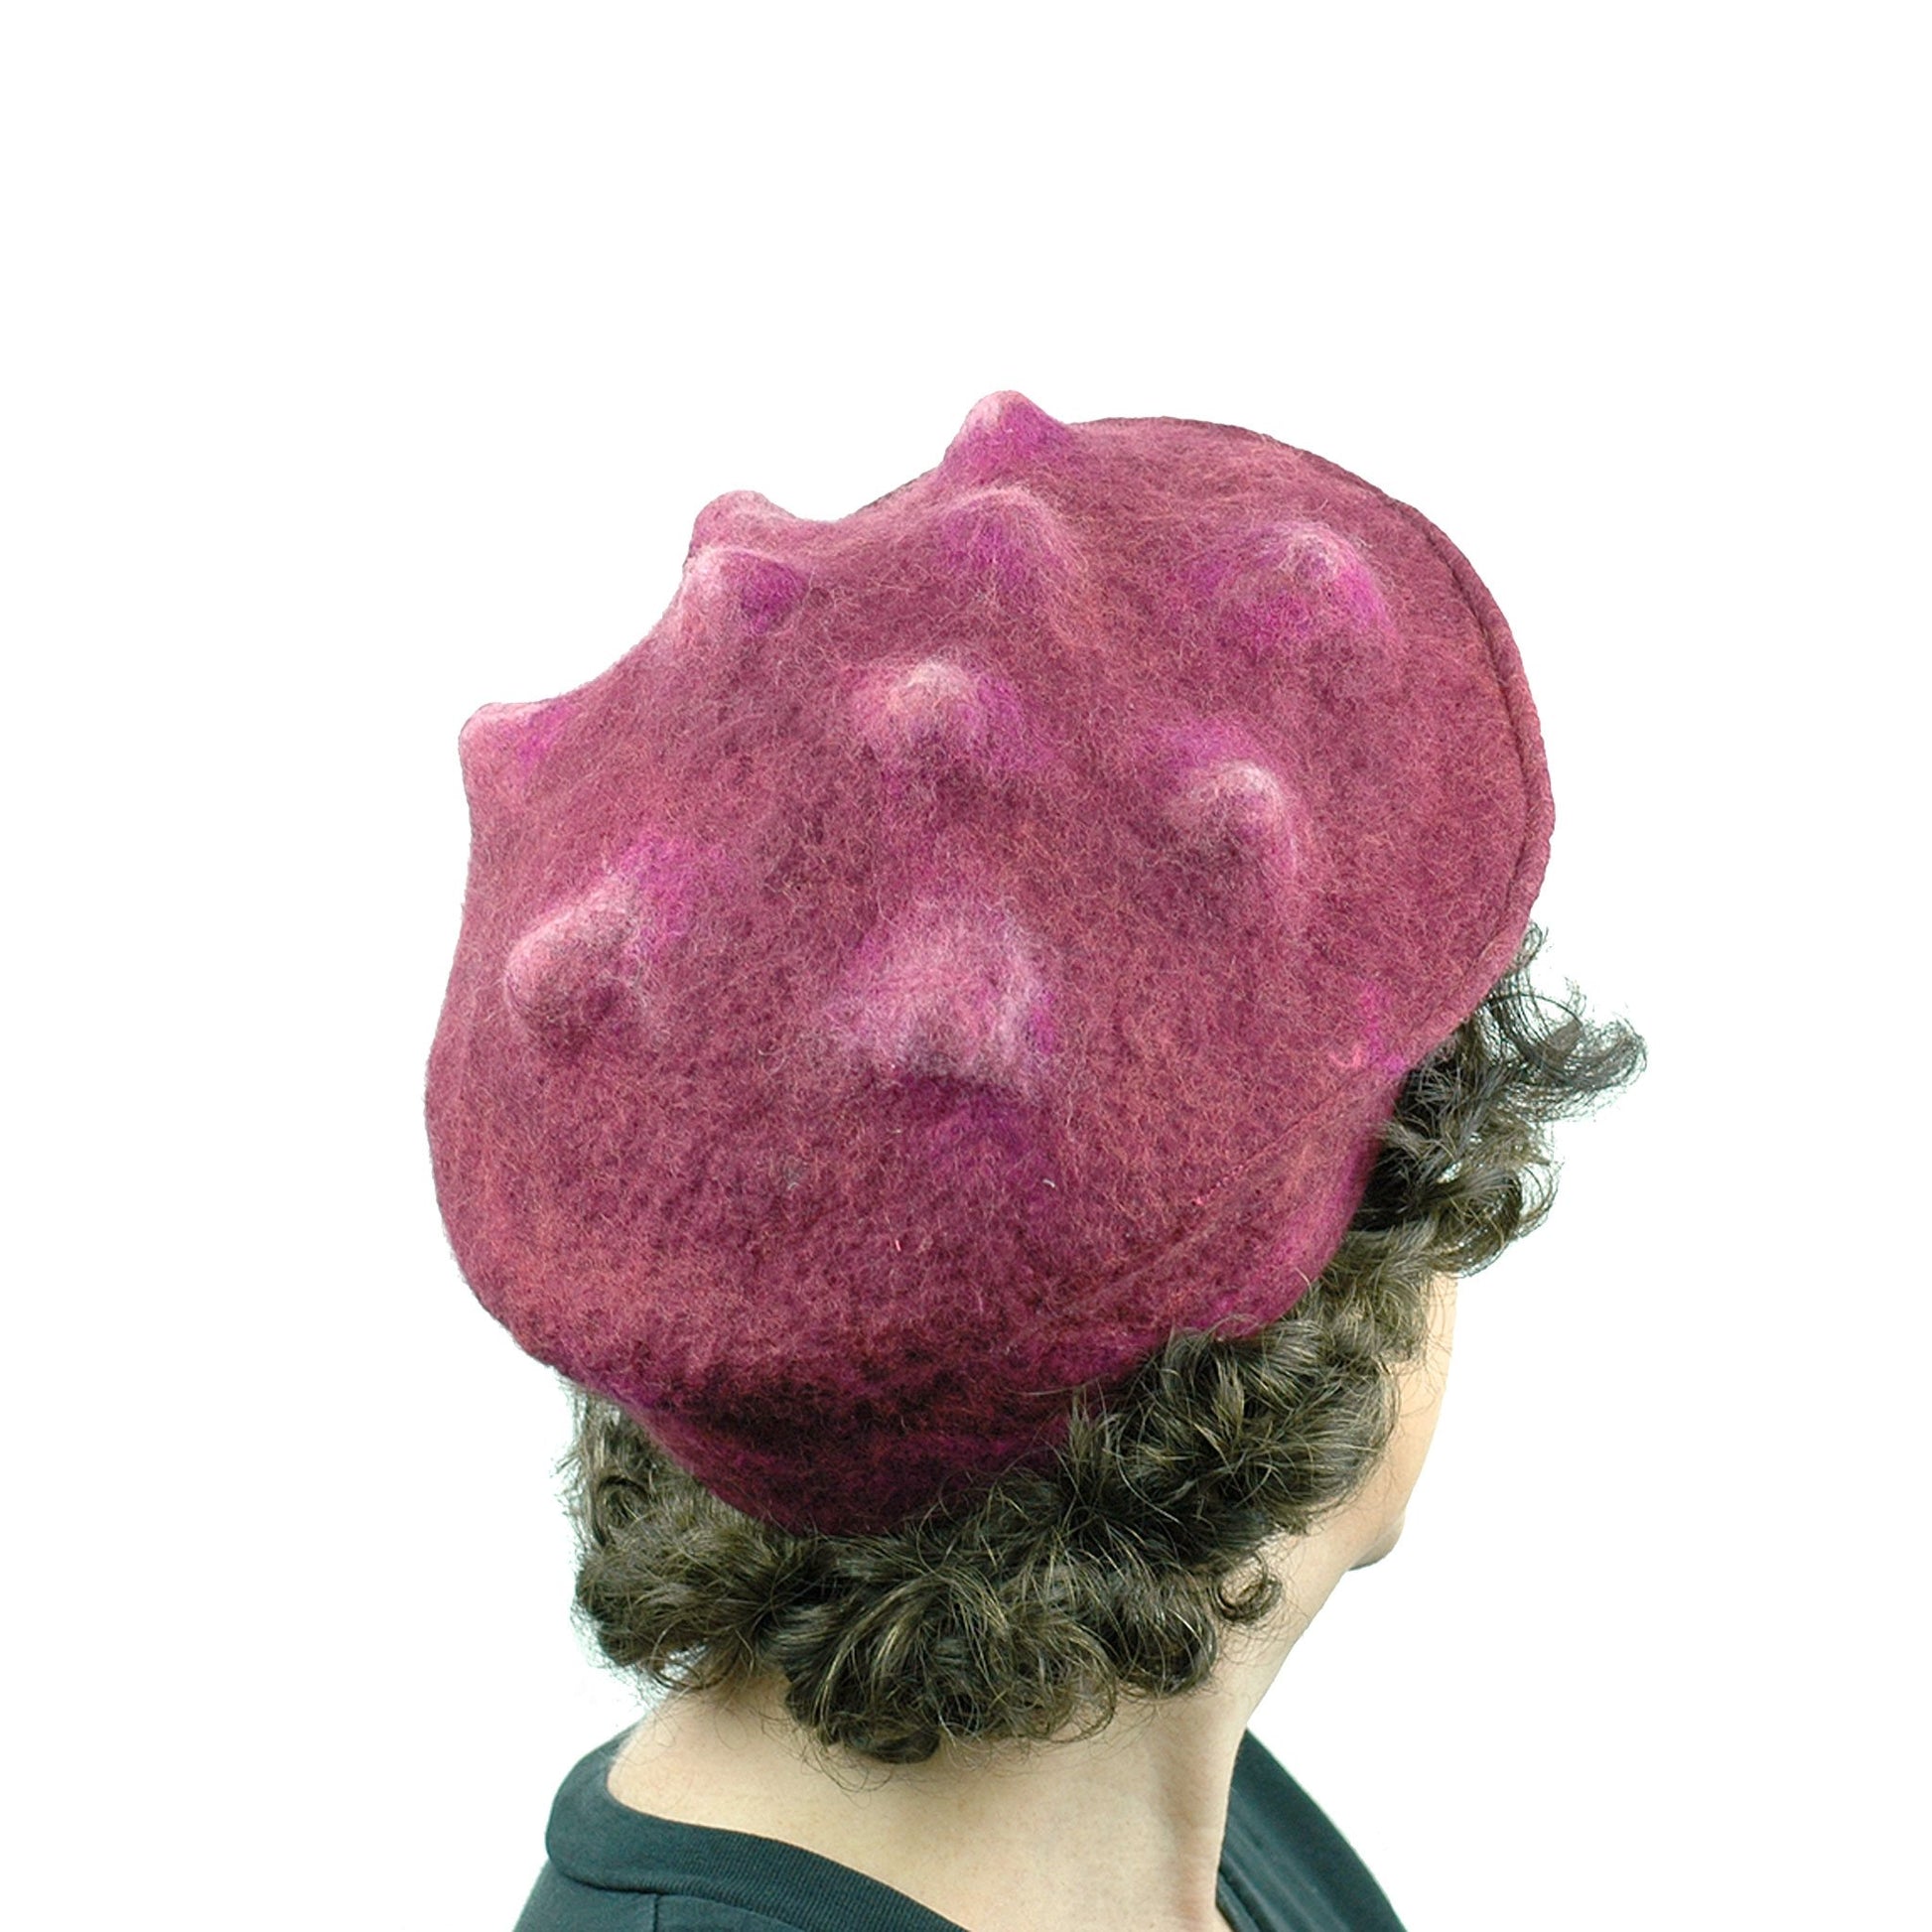 Felted Raspberry Beret - back view